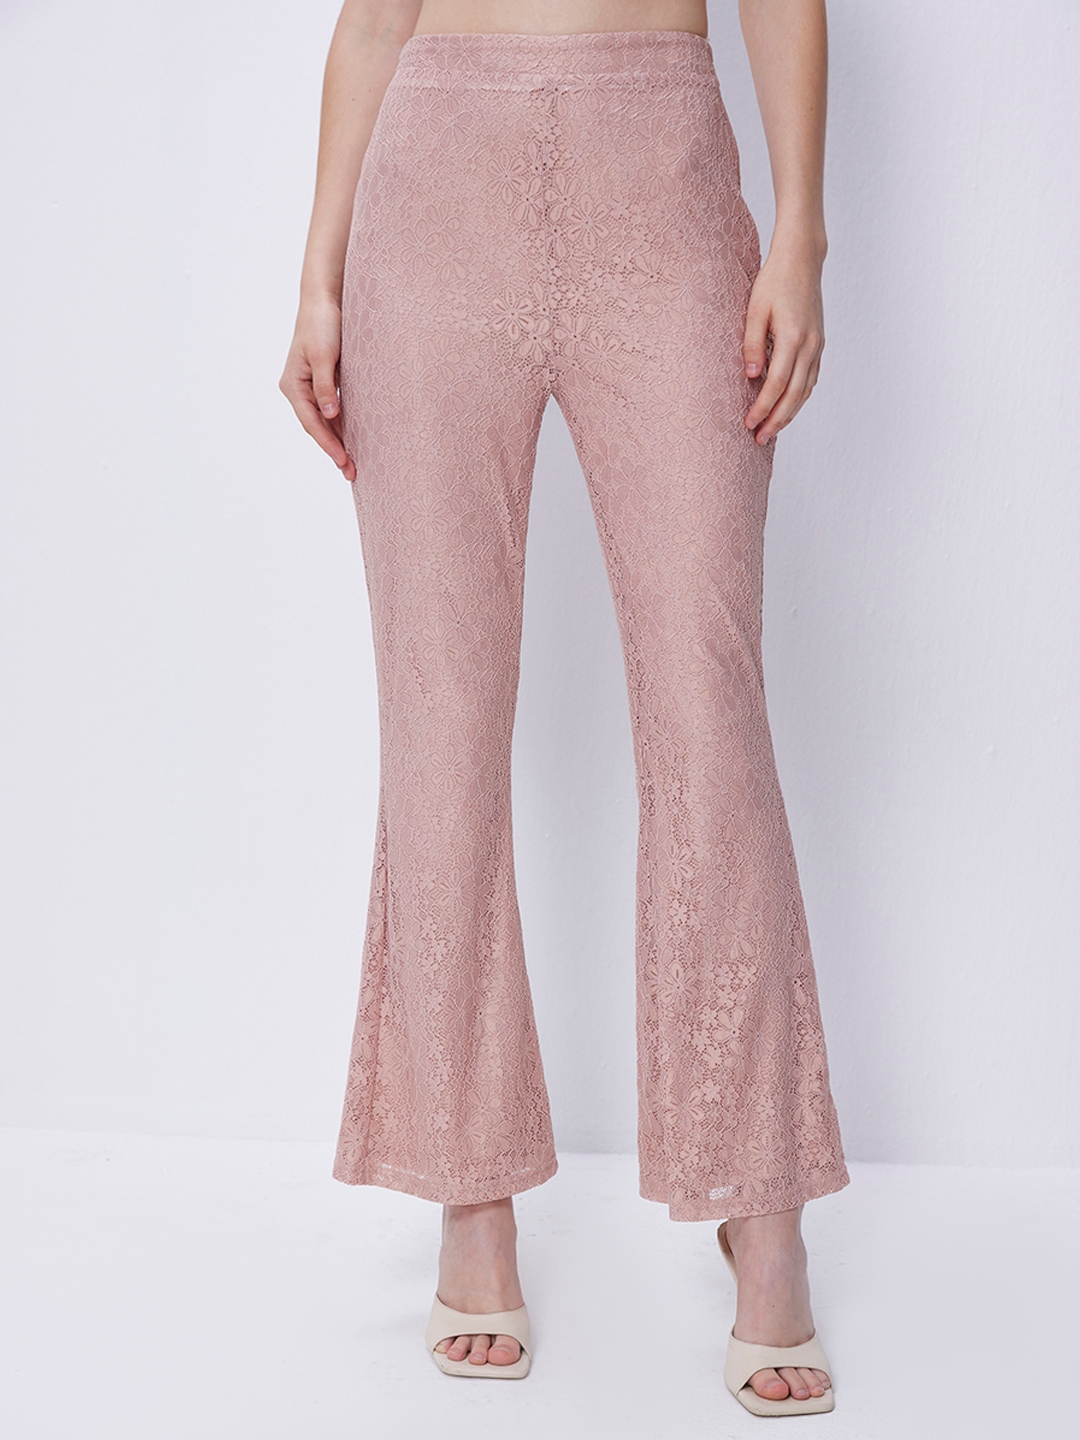 ROTATE high-waisted Sequin Design Trousers - Farfetch